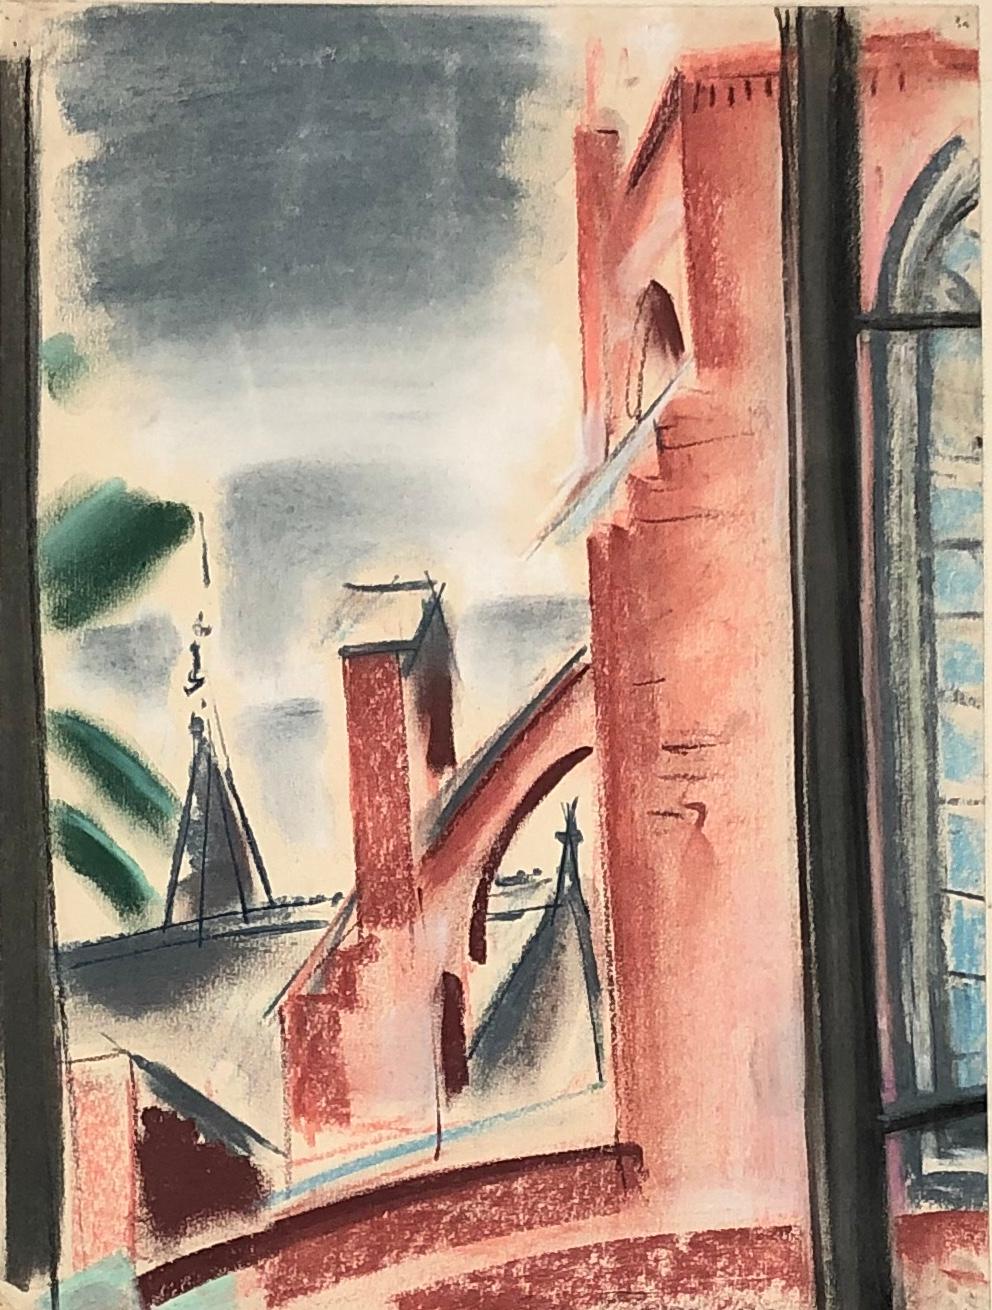 CLAES-THOBOIS Albert. Roof view. Pastel. Signed and dated 1929. - Art by Albert Claes-Thobois